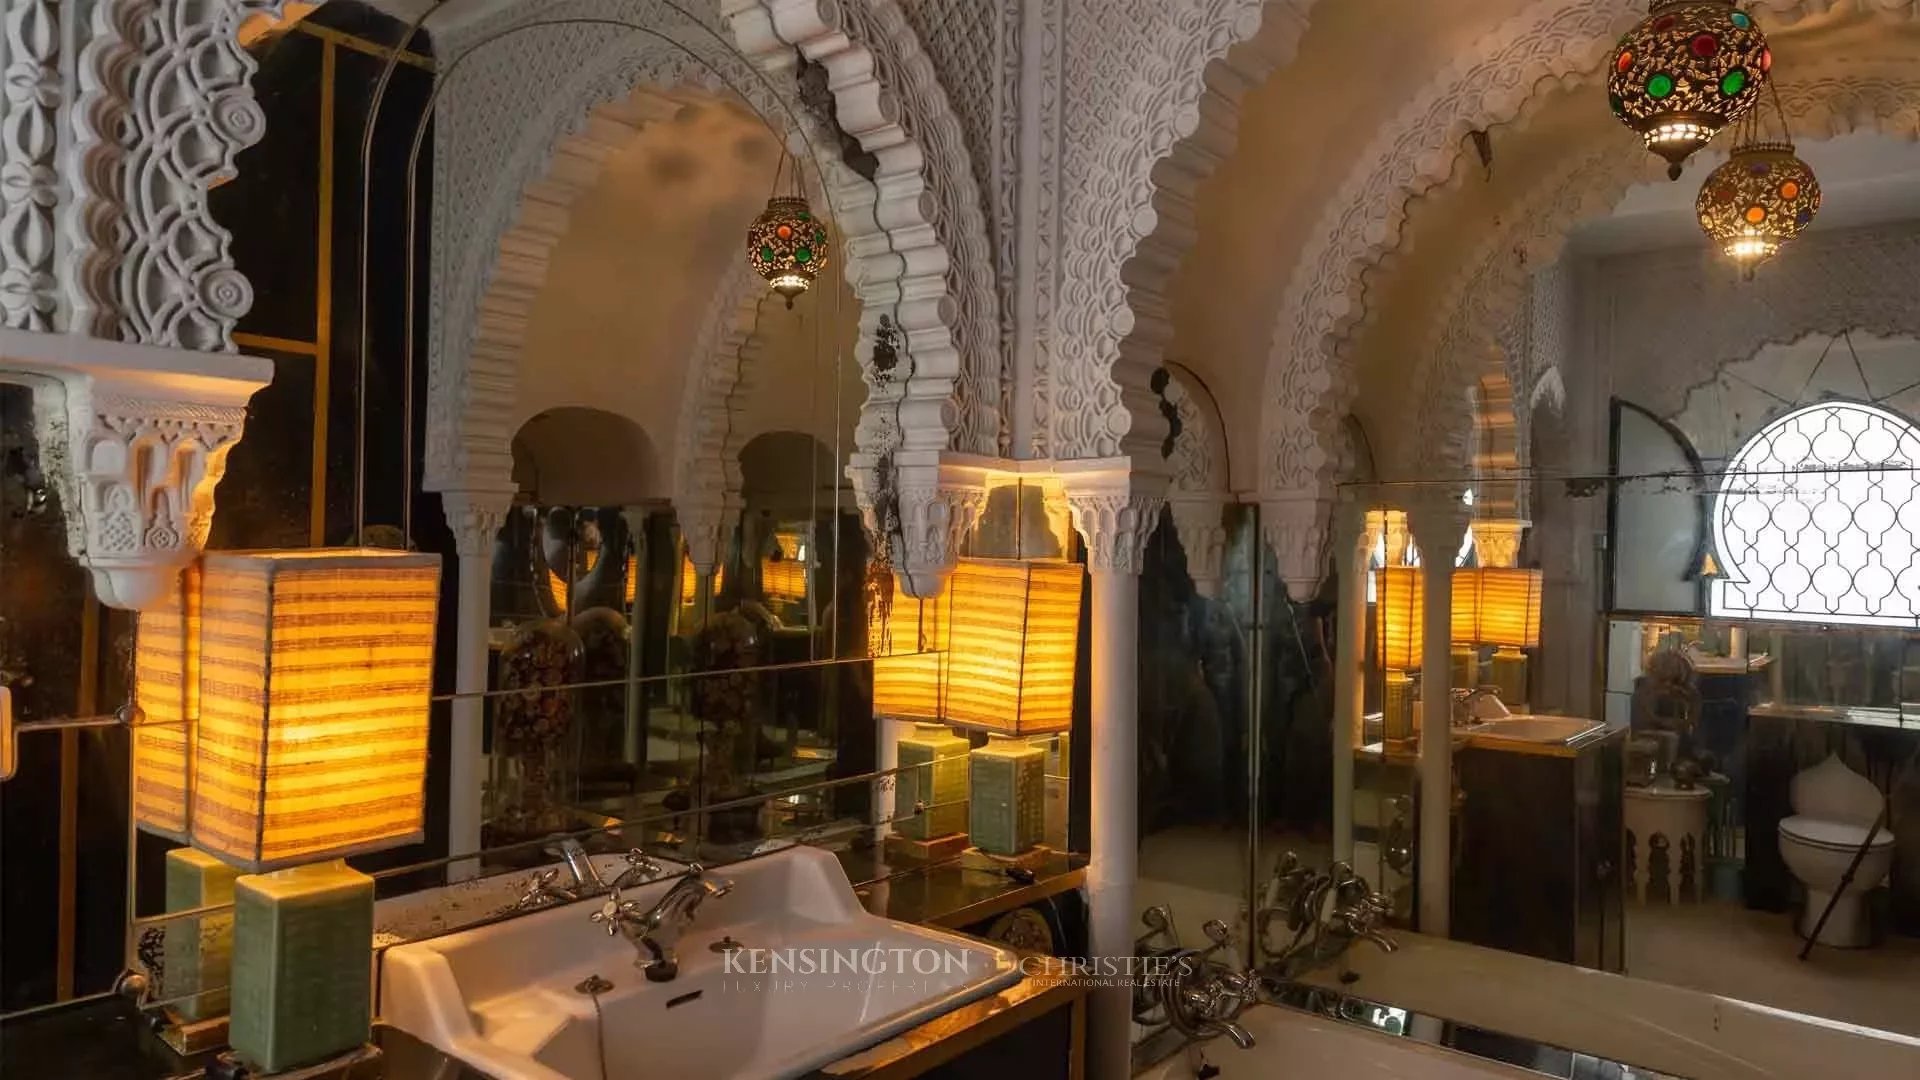 Sultan’s Palace in Tanger, Morocco